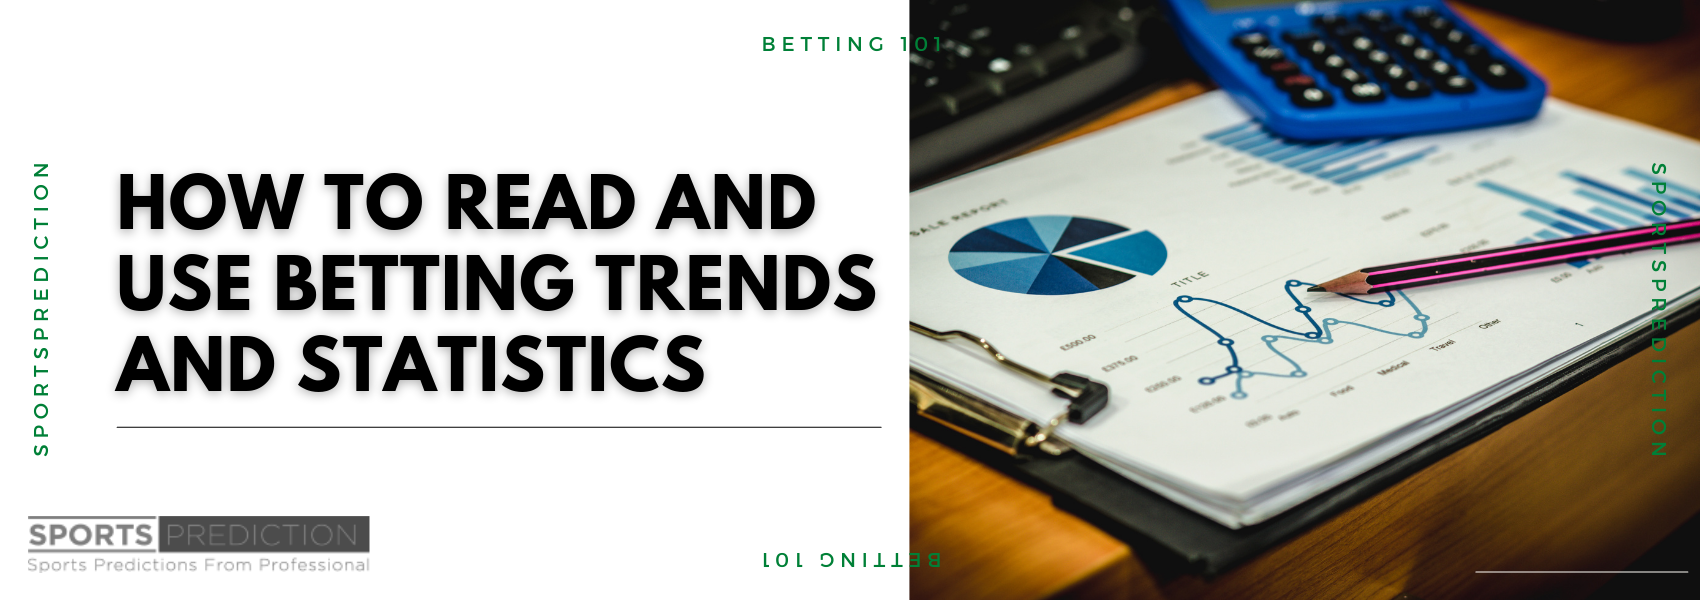 How To Read And Use Betting Trends And Statistics